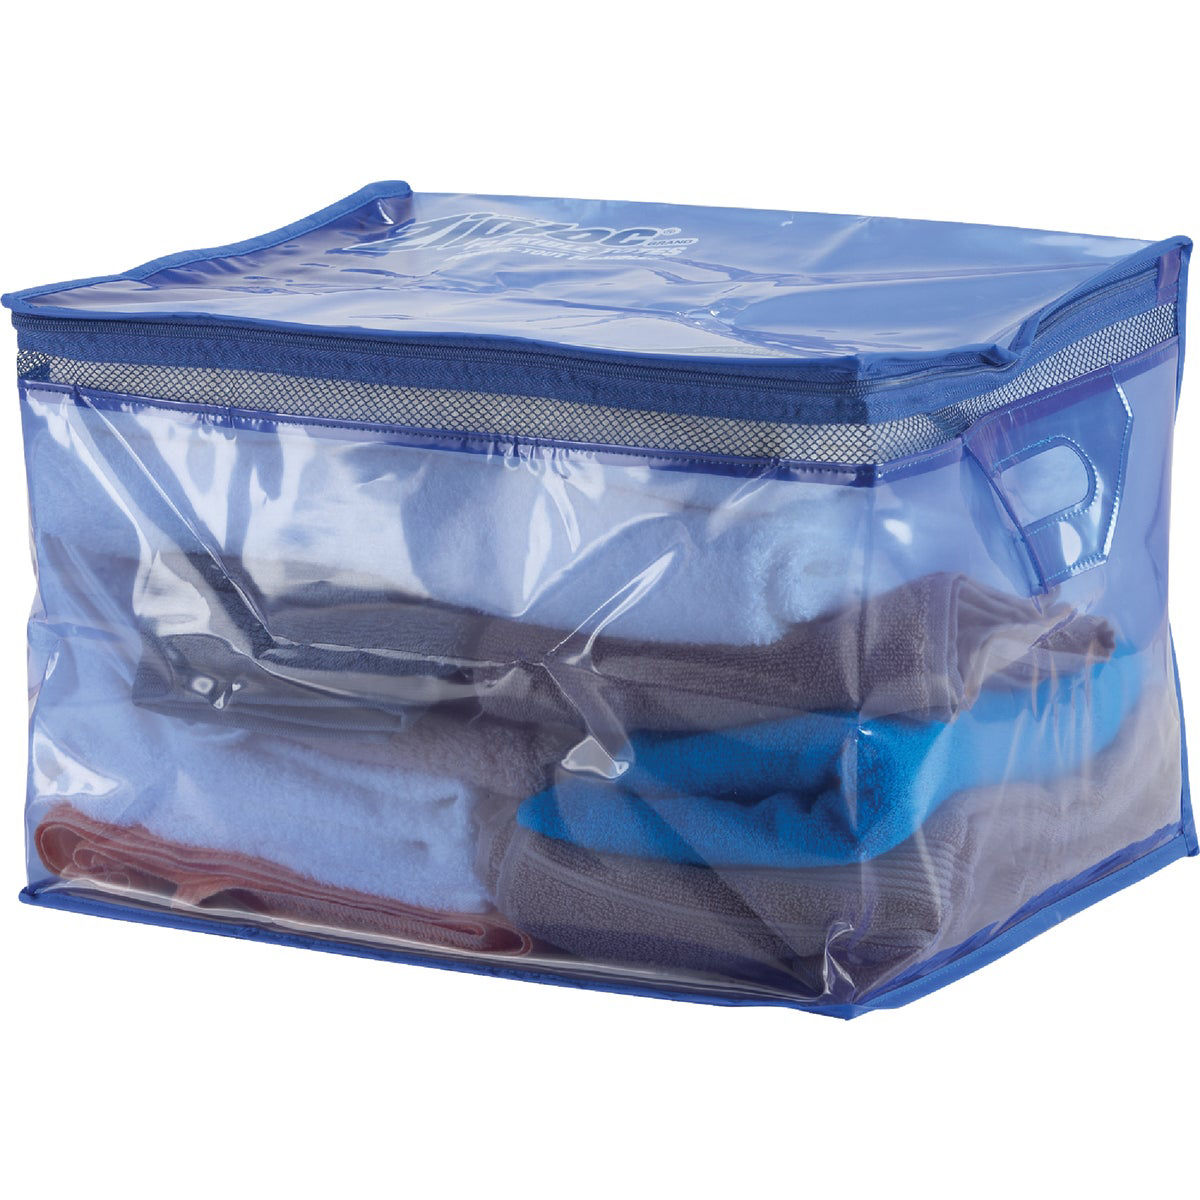 Ziploc Flexible Totes Clothes and Blanket Storage Bags, Perfect for Closet  Organization and Storing Under Beds, XL, 4 Count